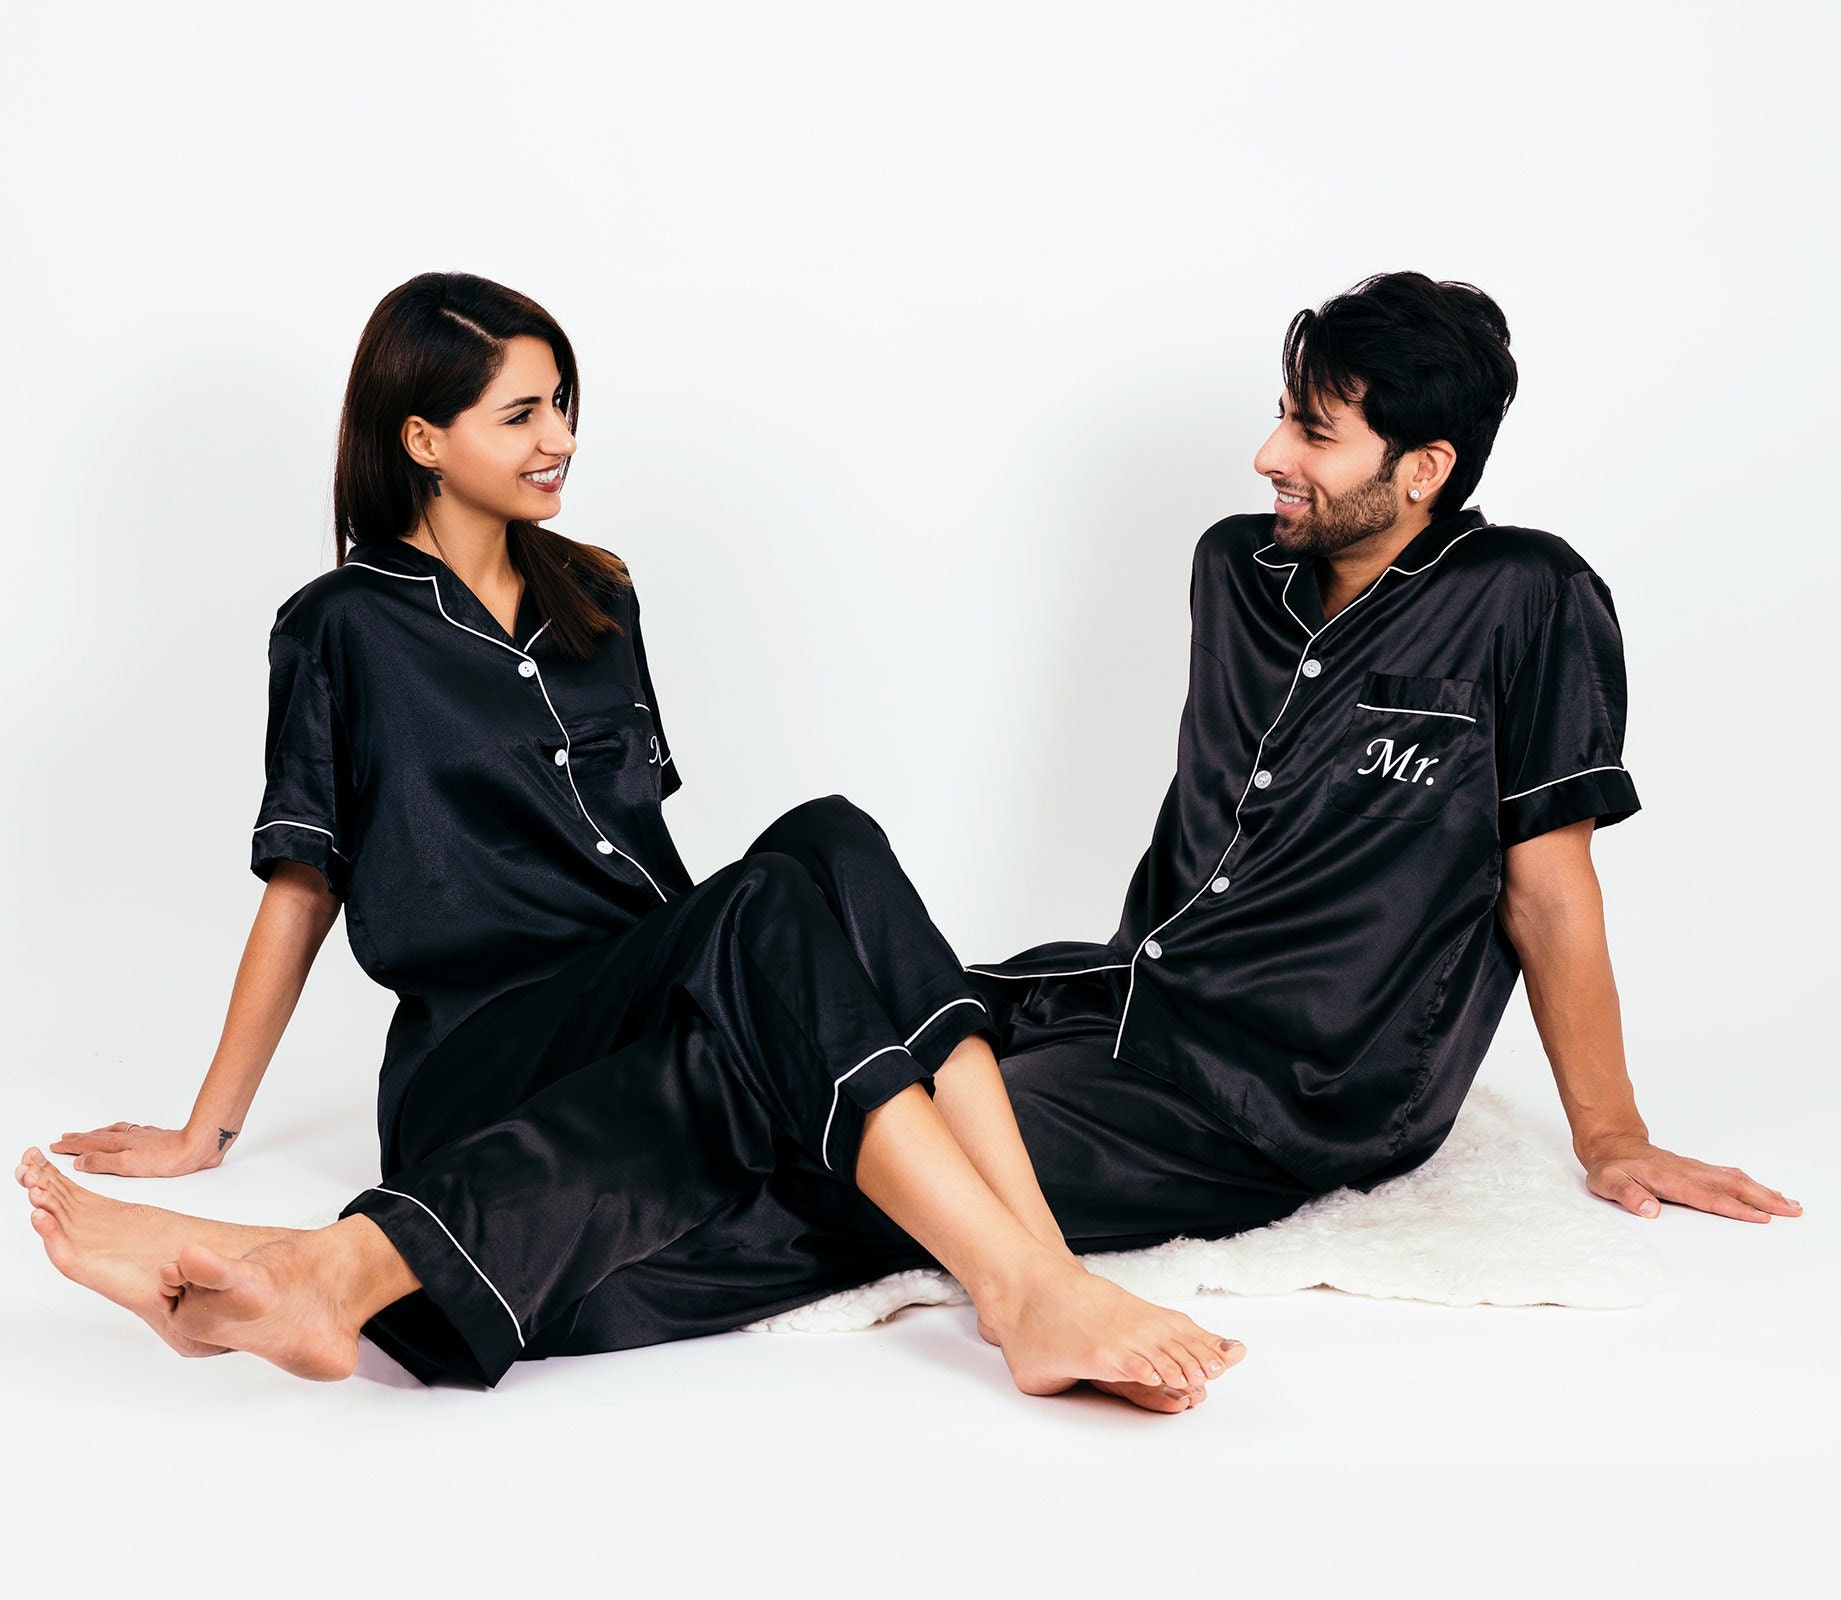 Buy Customized Pjs, Mr and Mrs Pajamas, Bride and Groom Satin Pajamas Sets,  Honeymoon Pajamas, Couple Matching Gowns, Personalized Pjs SL Online in  India 